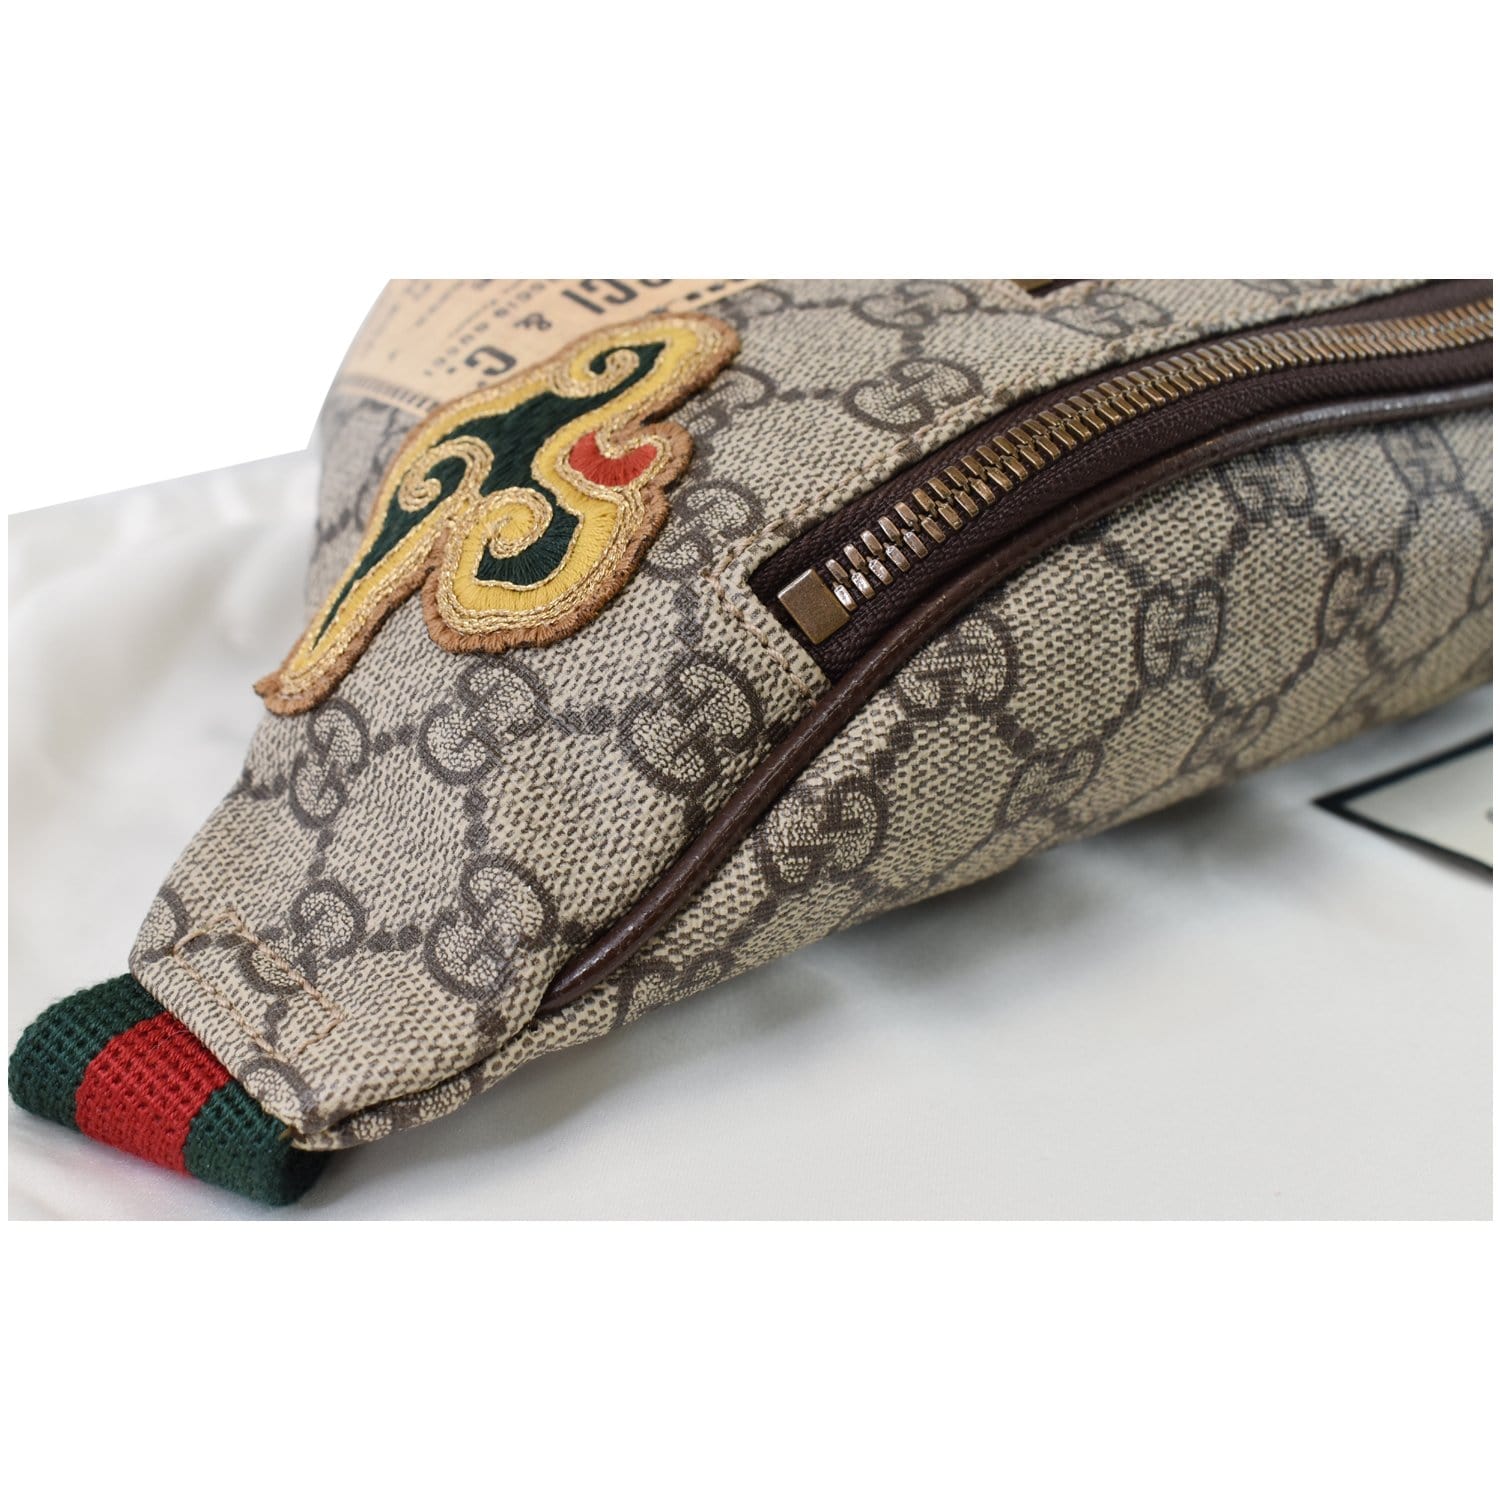 Gucci Courrier Waist Bag GG Supreme Beige/Ebony in Canvas with Brass - US